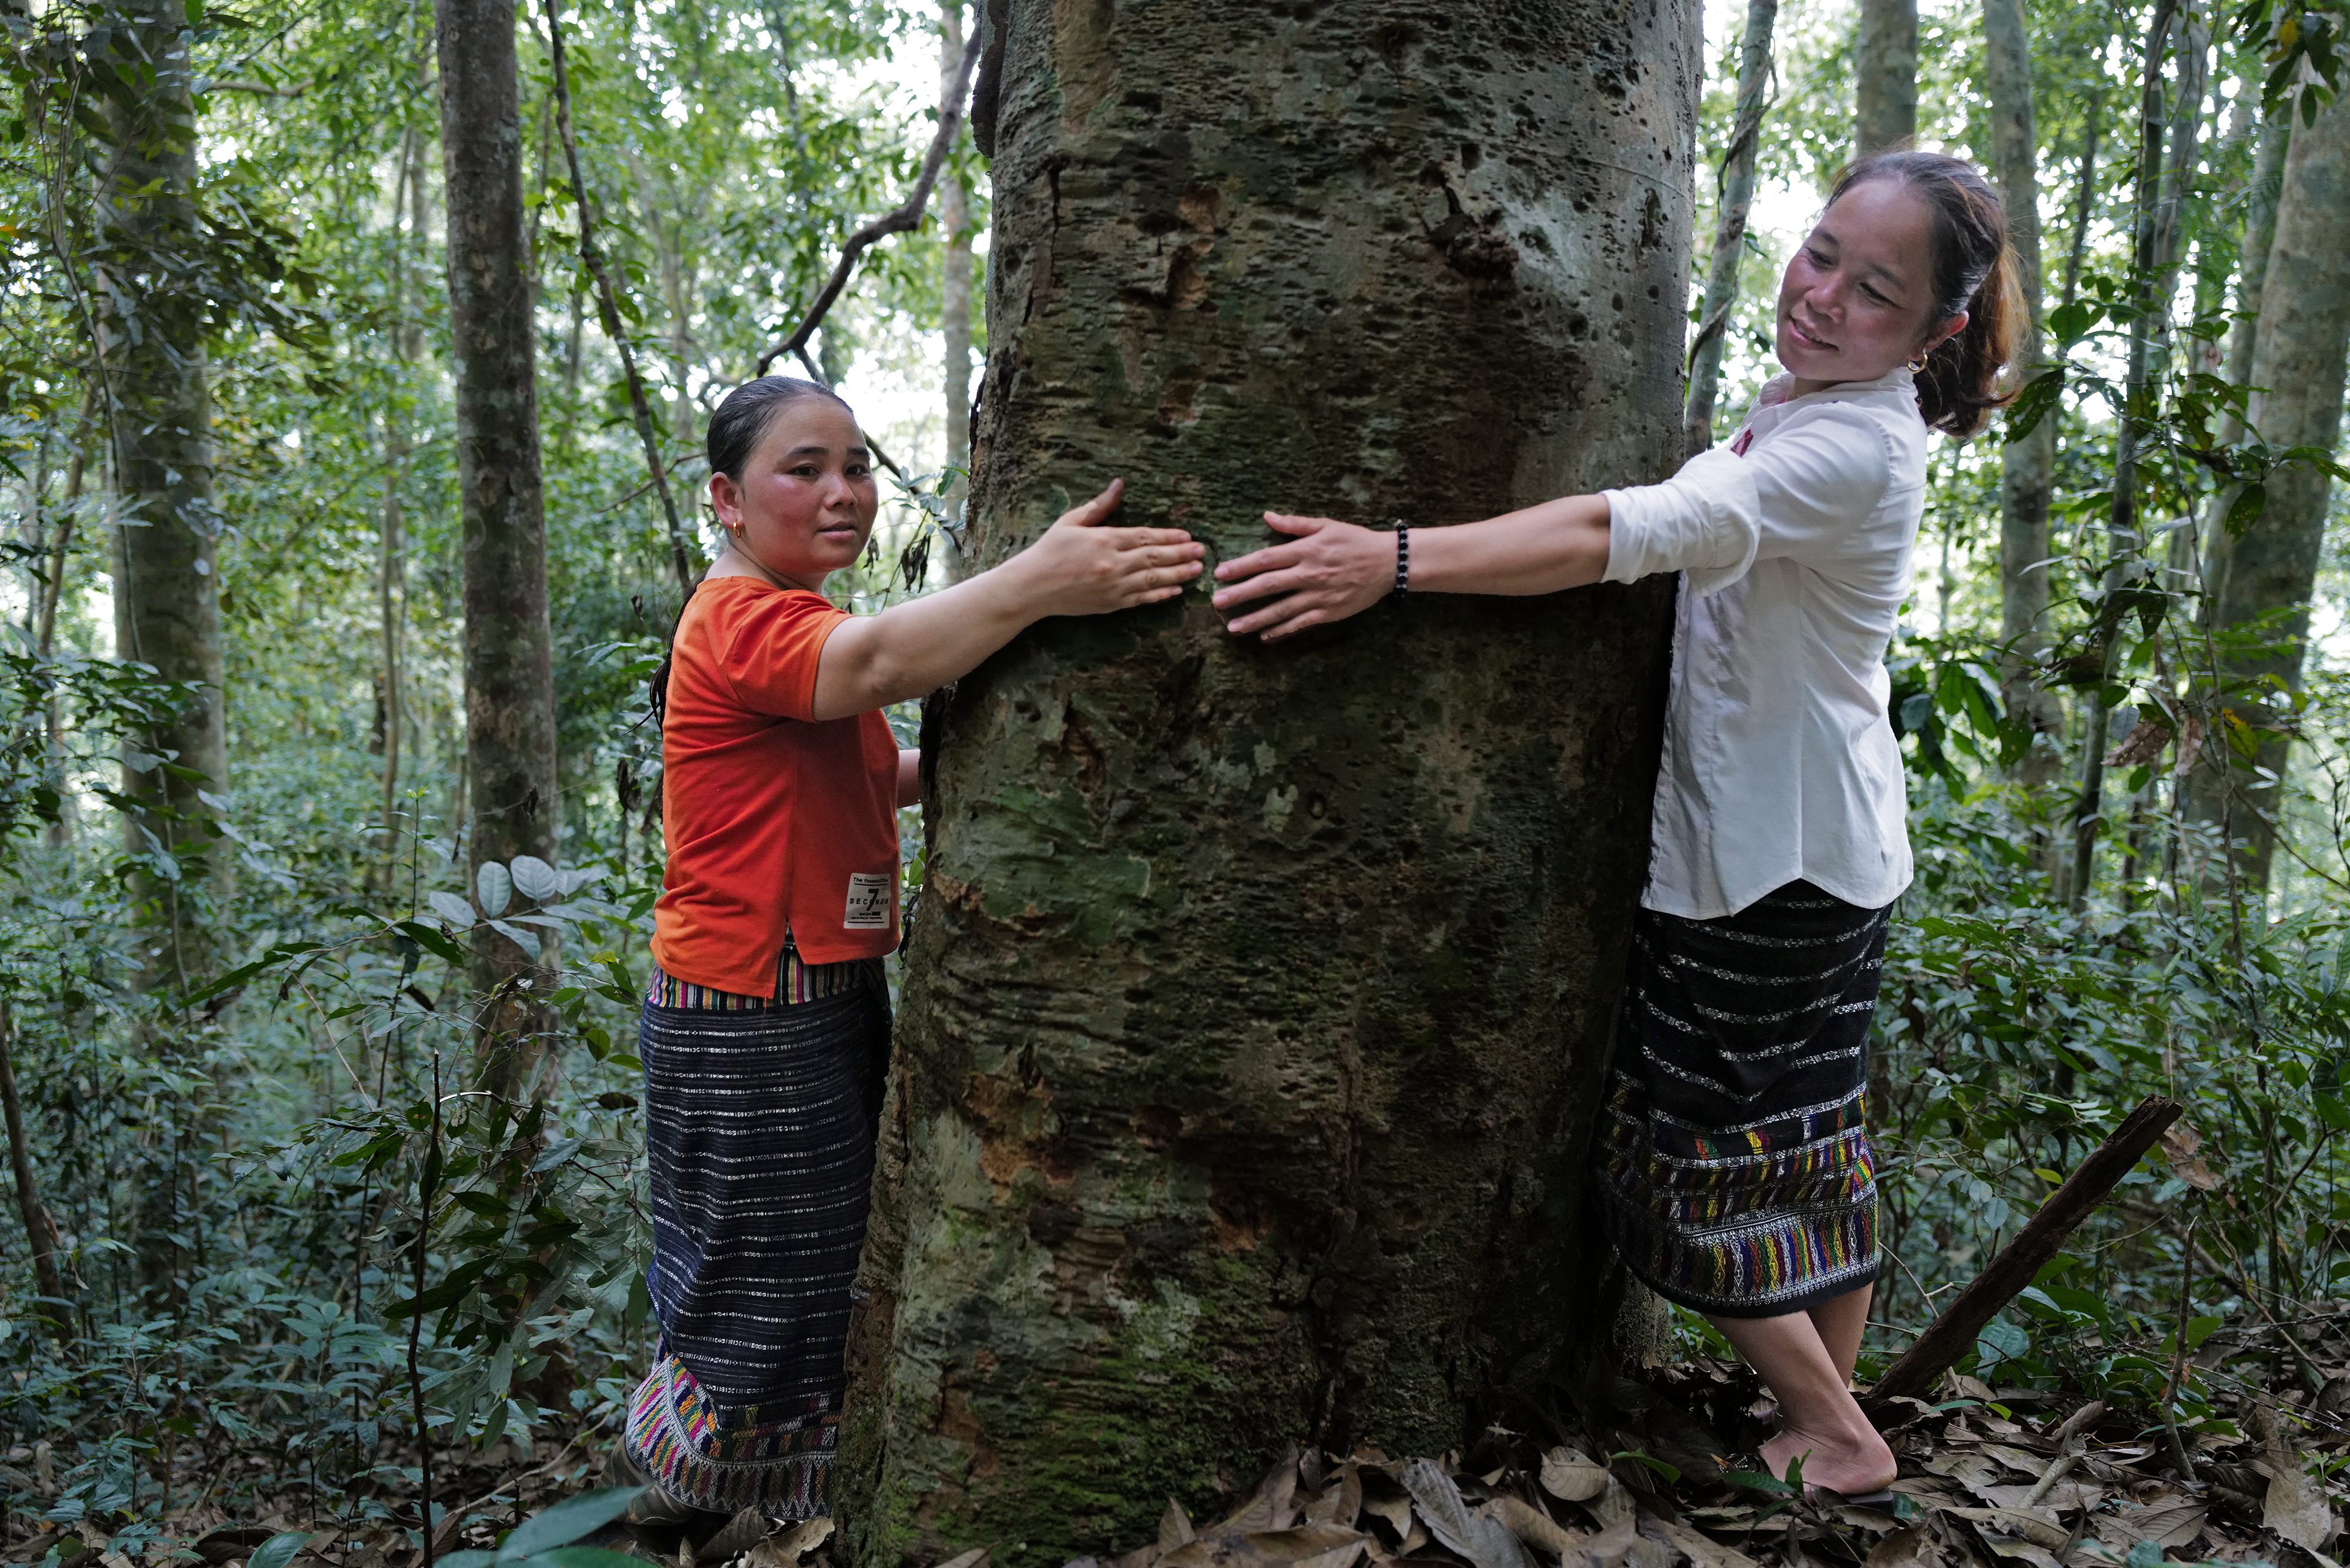 Indigenous Peoples, women and local communities play a key role in the conservation of forests and biodiversity. It is crucial that their voices be heard. Photo by RECOFTC.